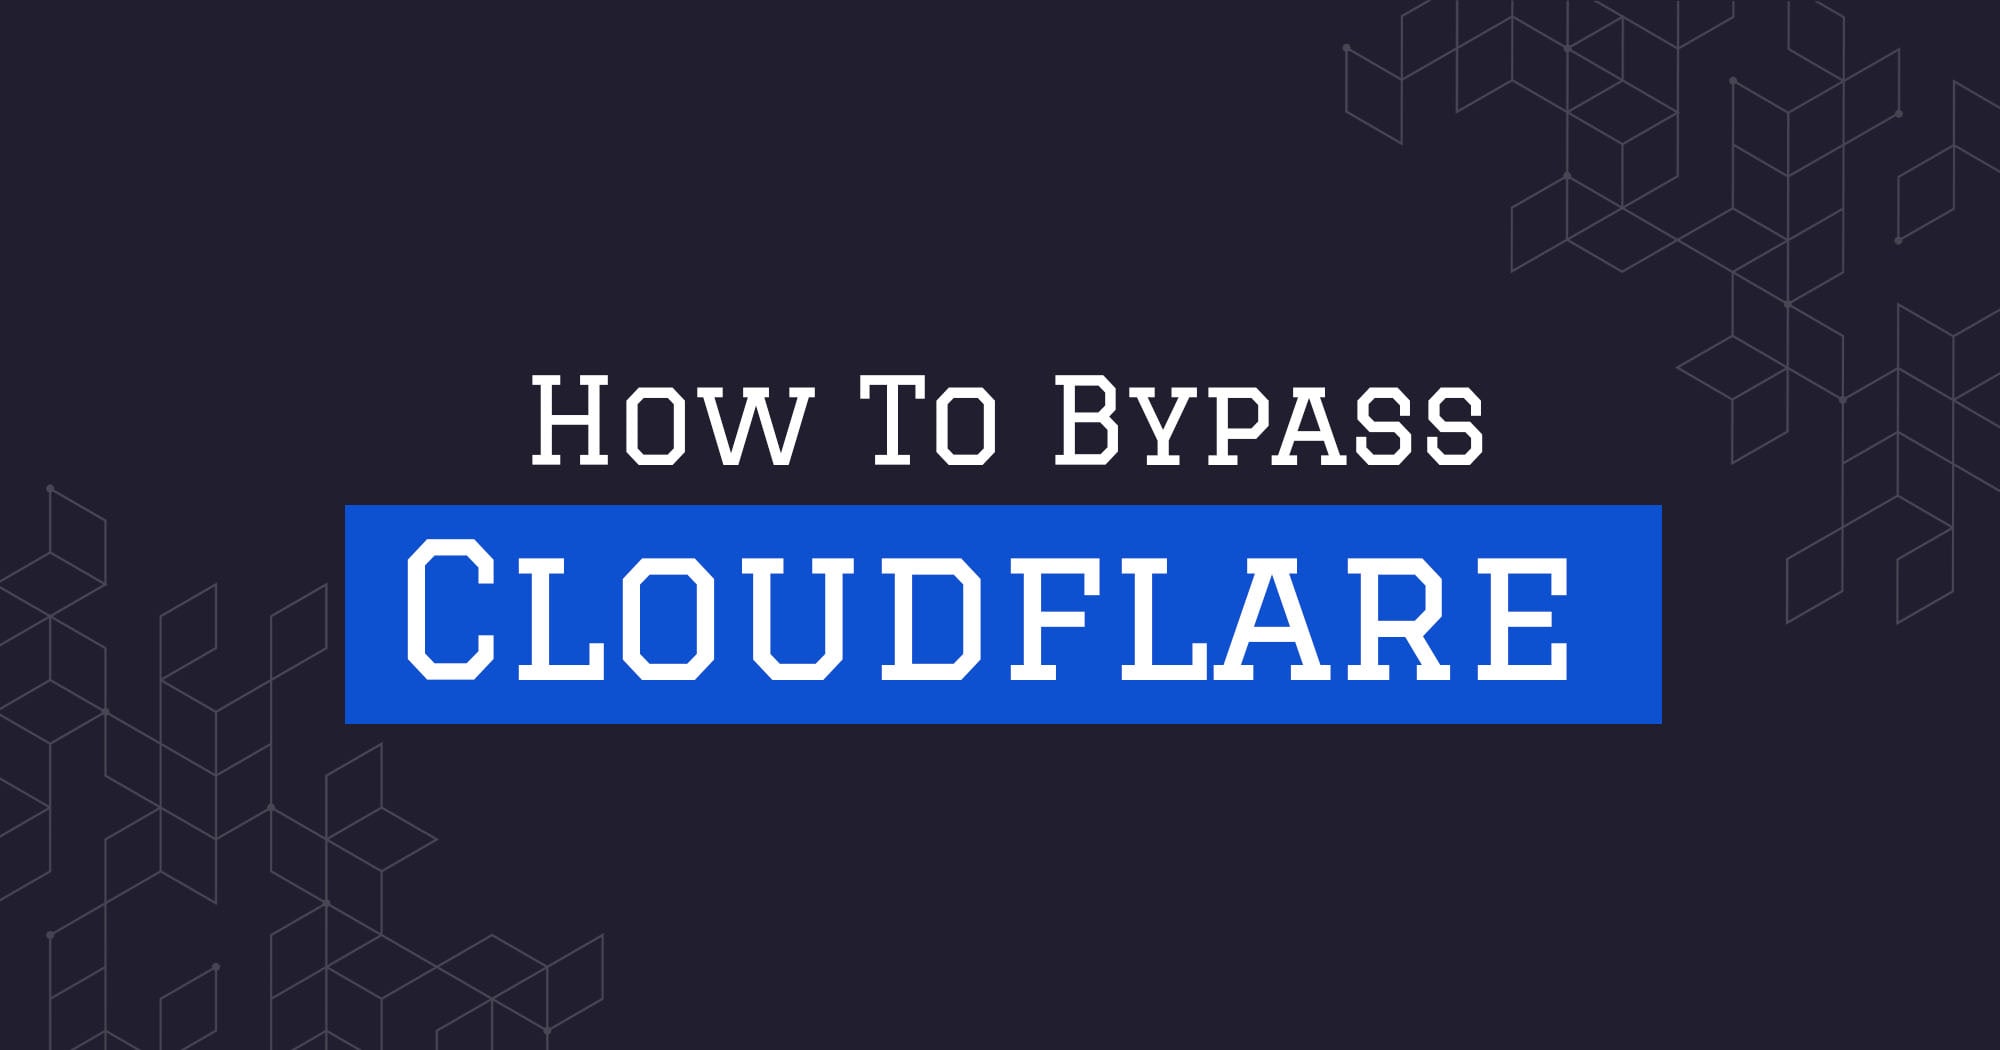 The Web Scraping Playbook - How To Bypass Cloudflare